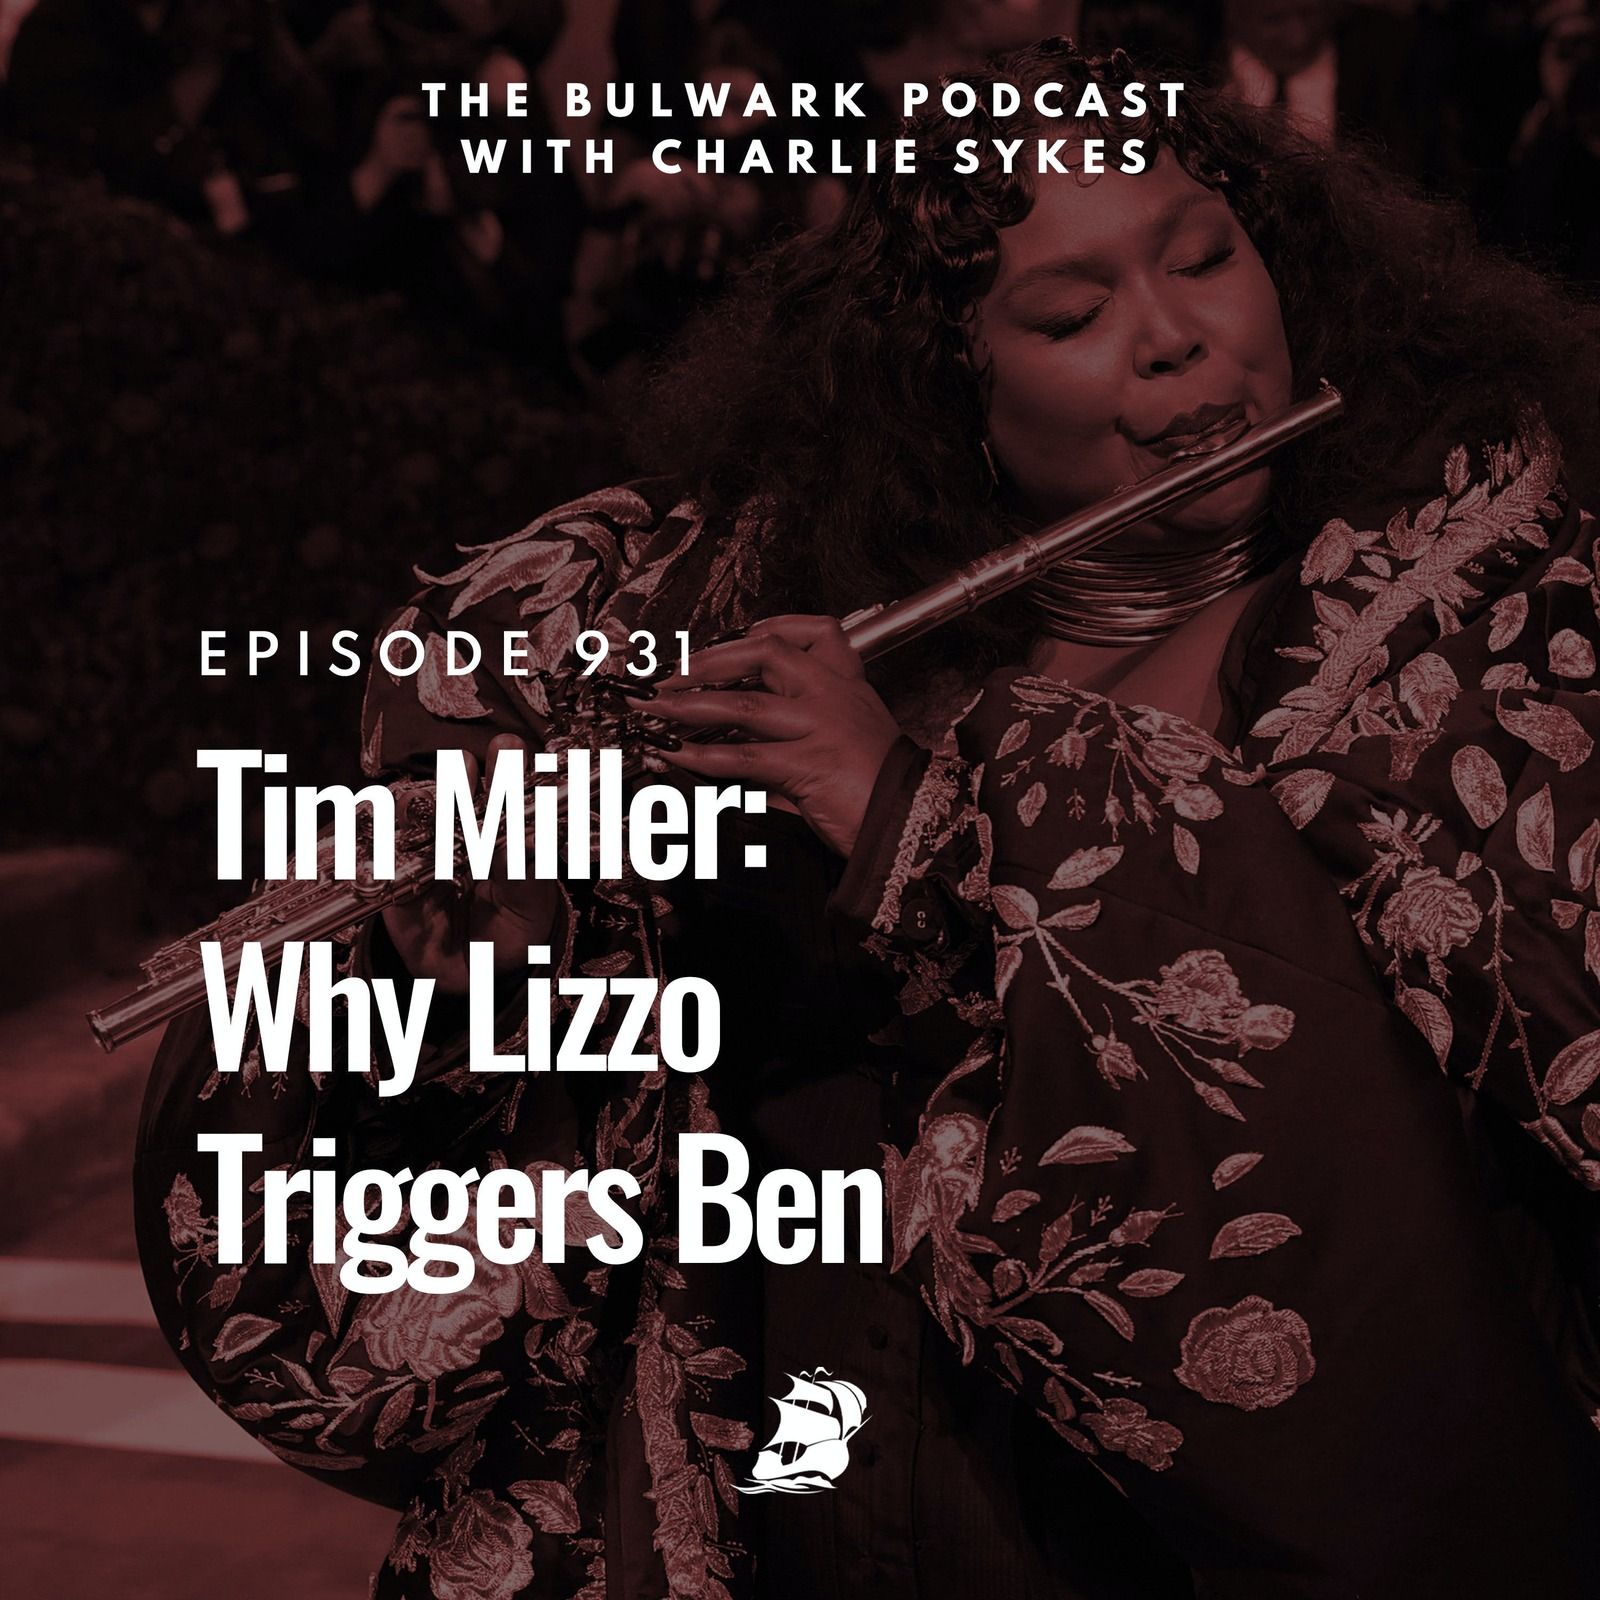 Tim Miller: Why Lizzo Triggers Ben